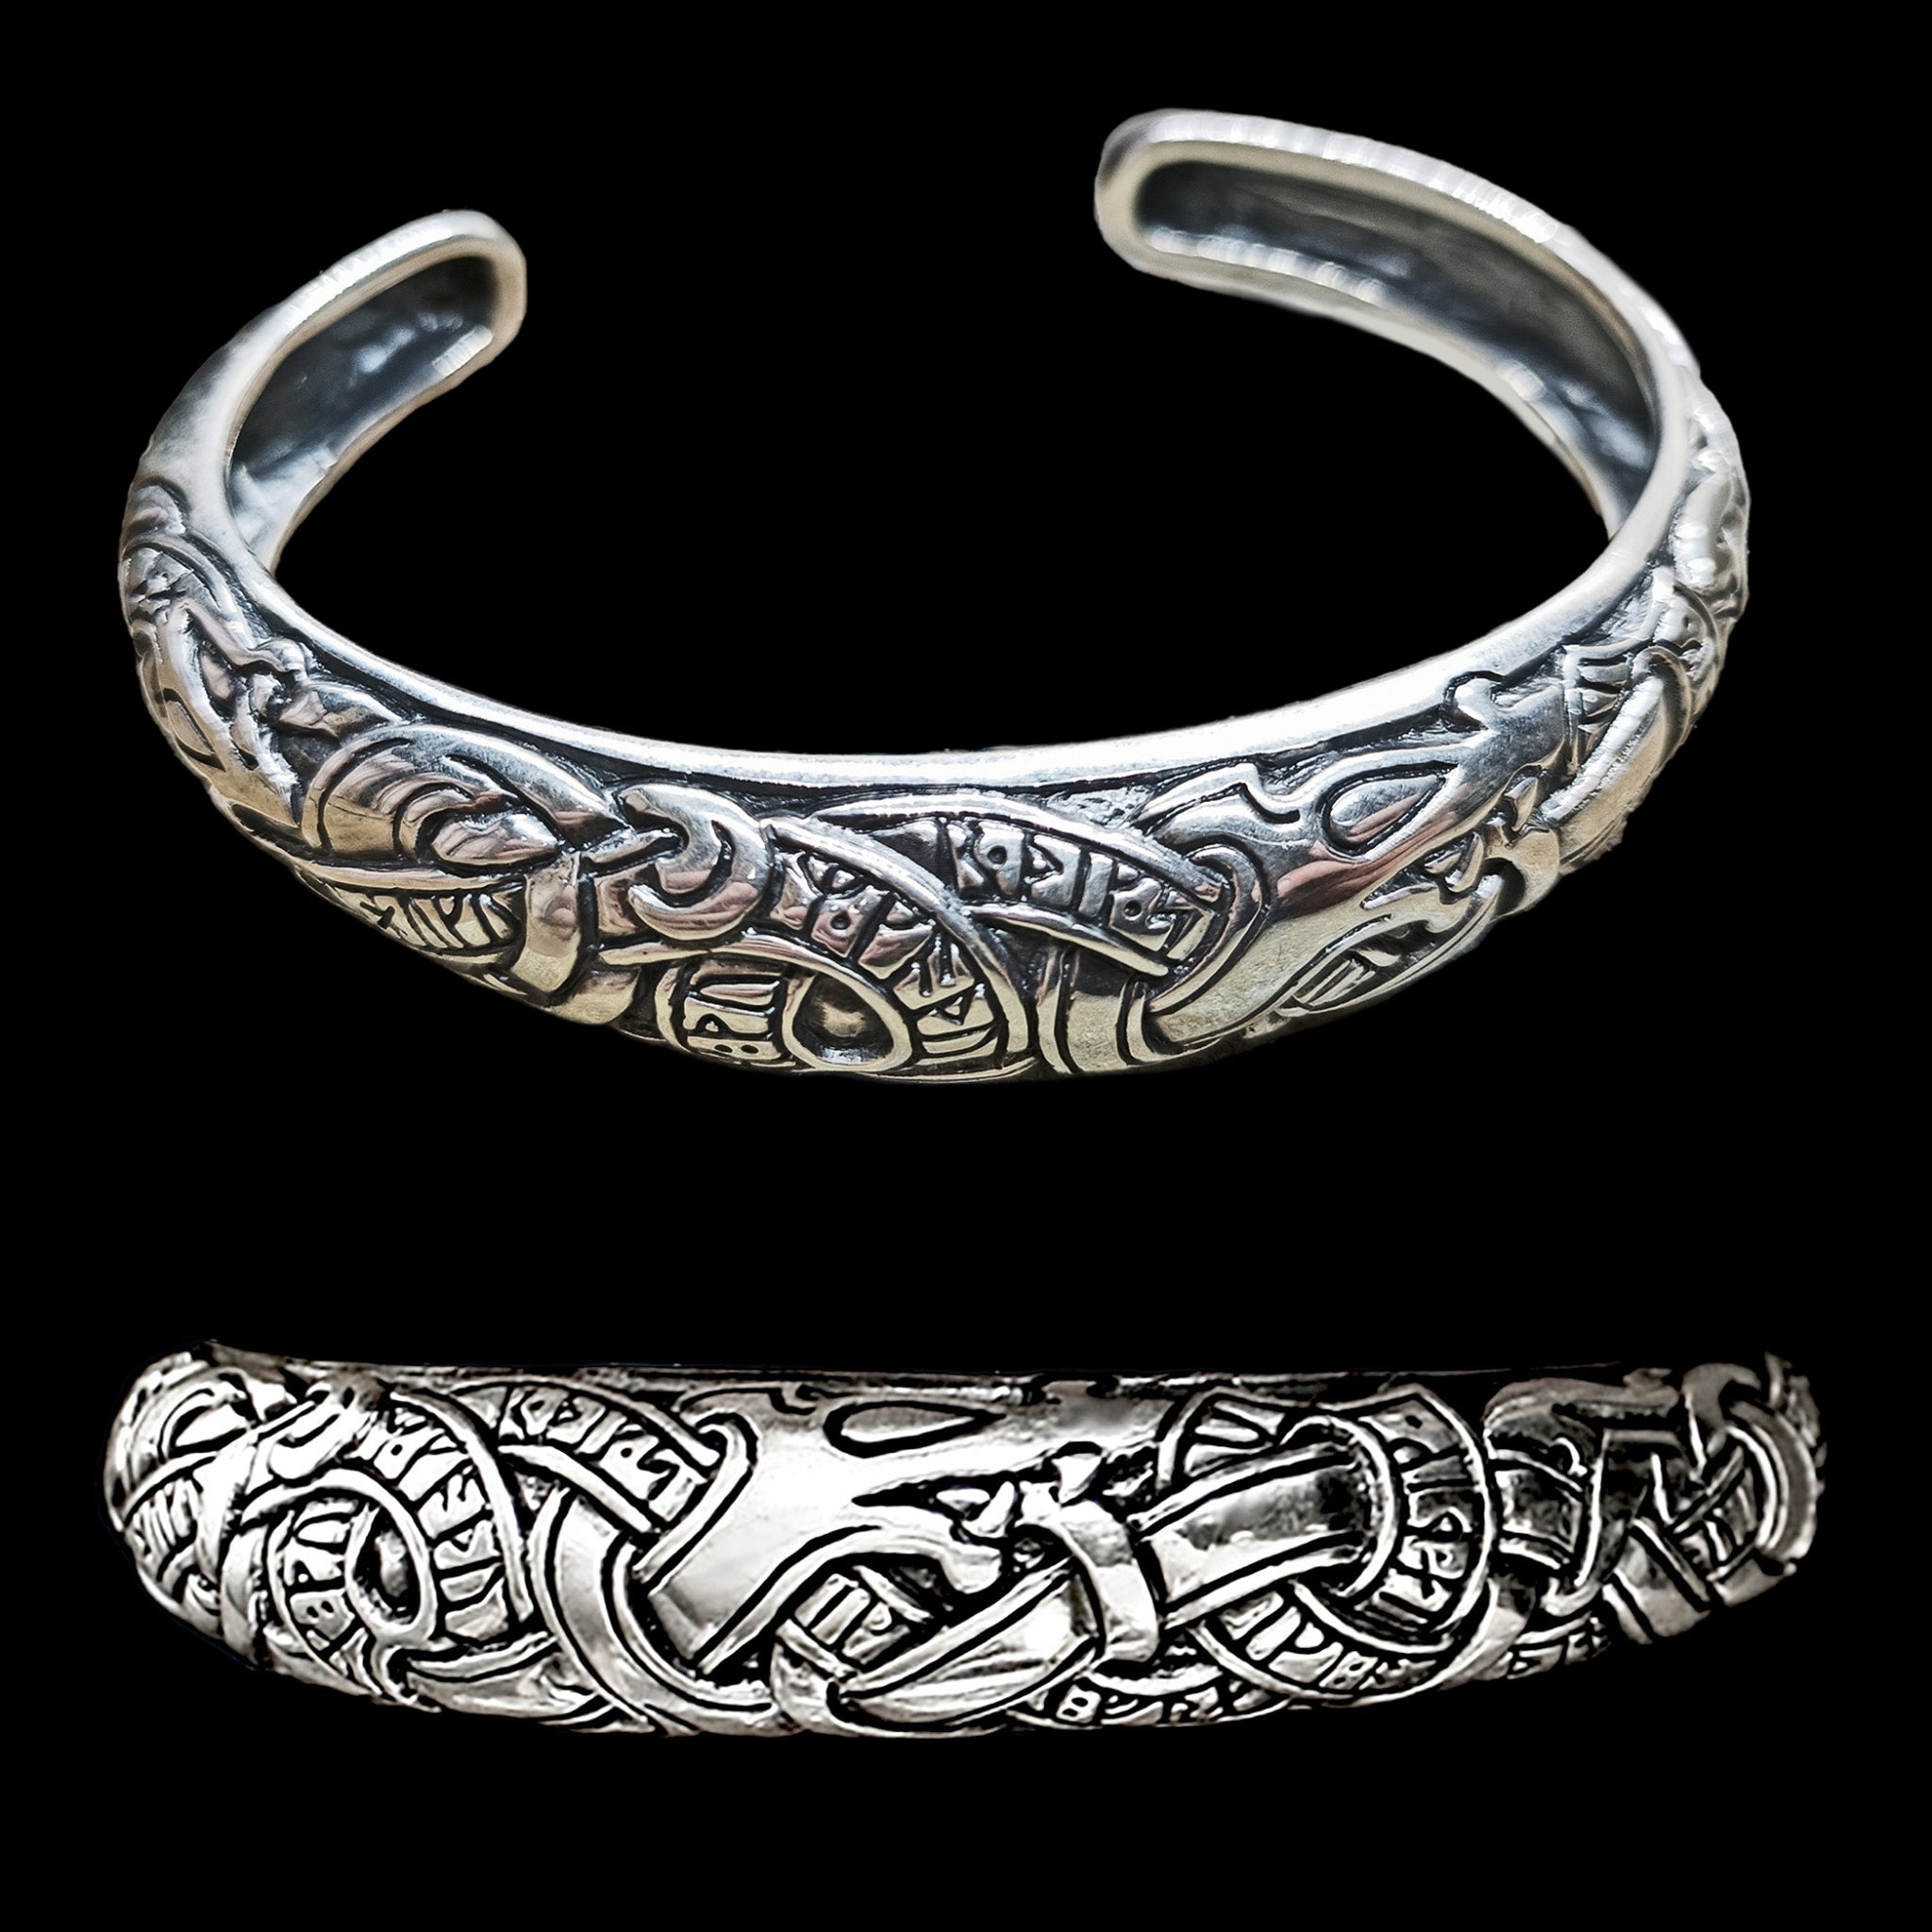 Silver Runic Viking Arm Ring - Front and Angle Views